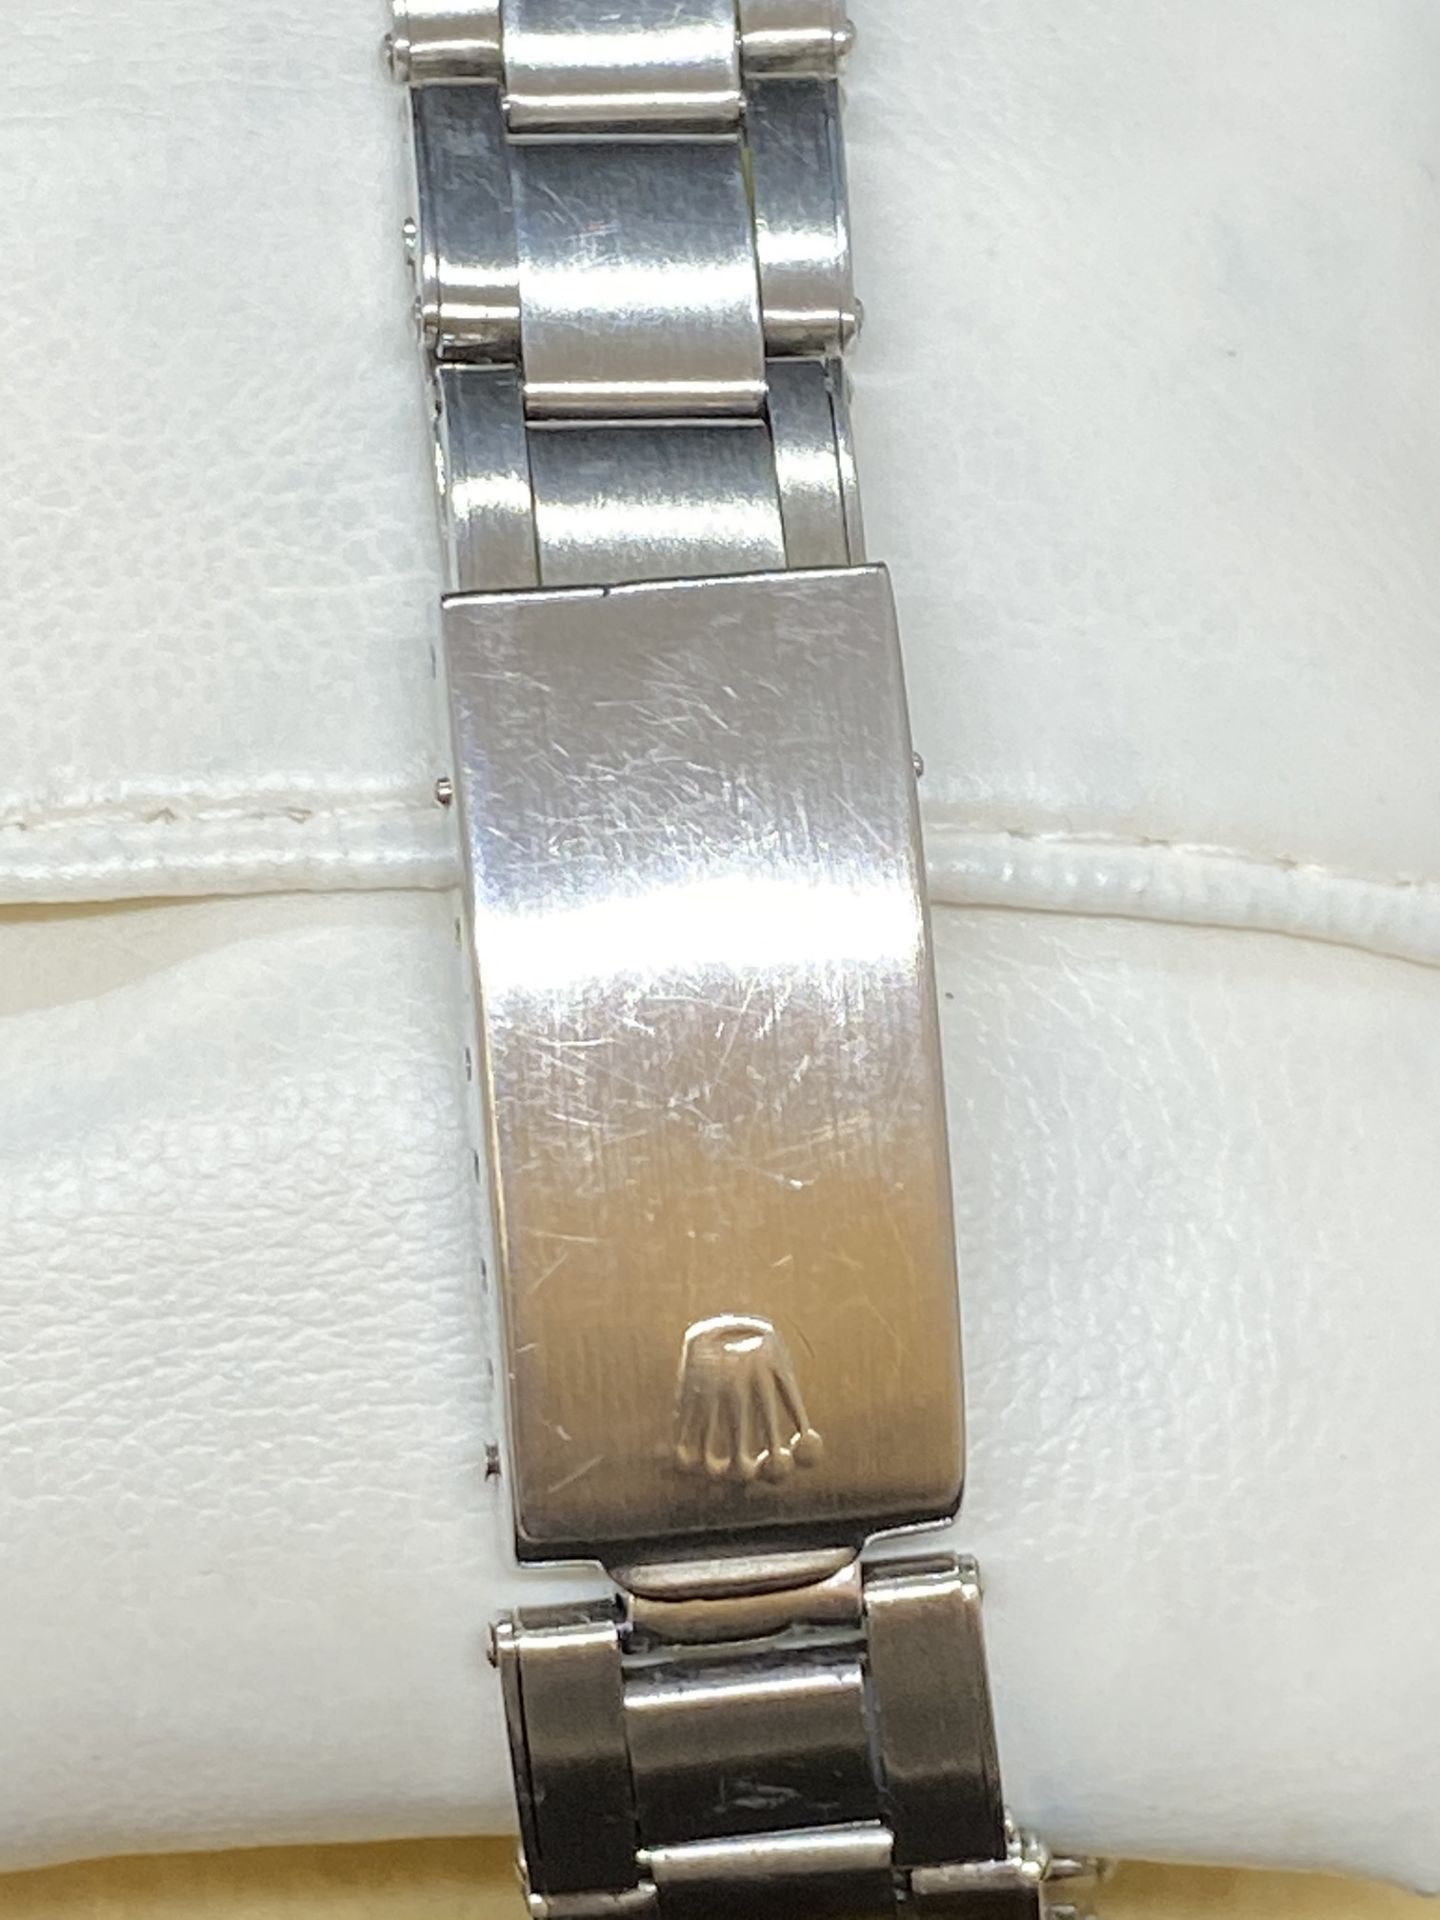 ROLEX OYSTERDATE PRECISION WATCH - Image 9 of 15